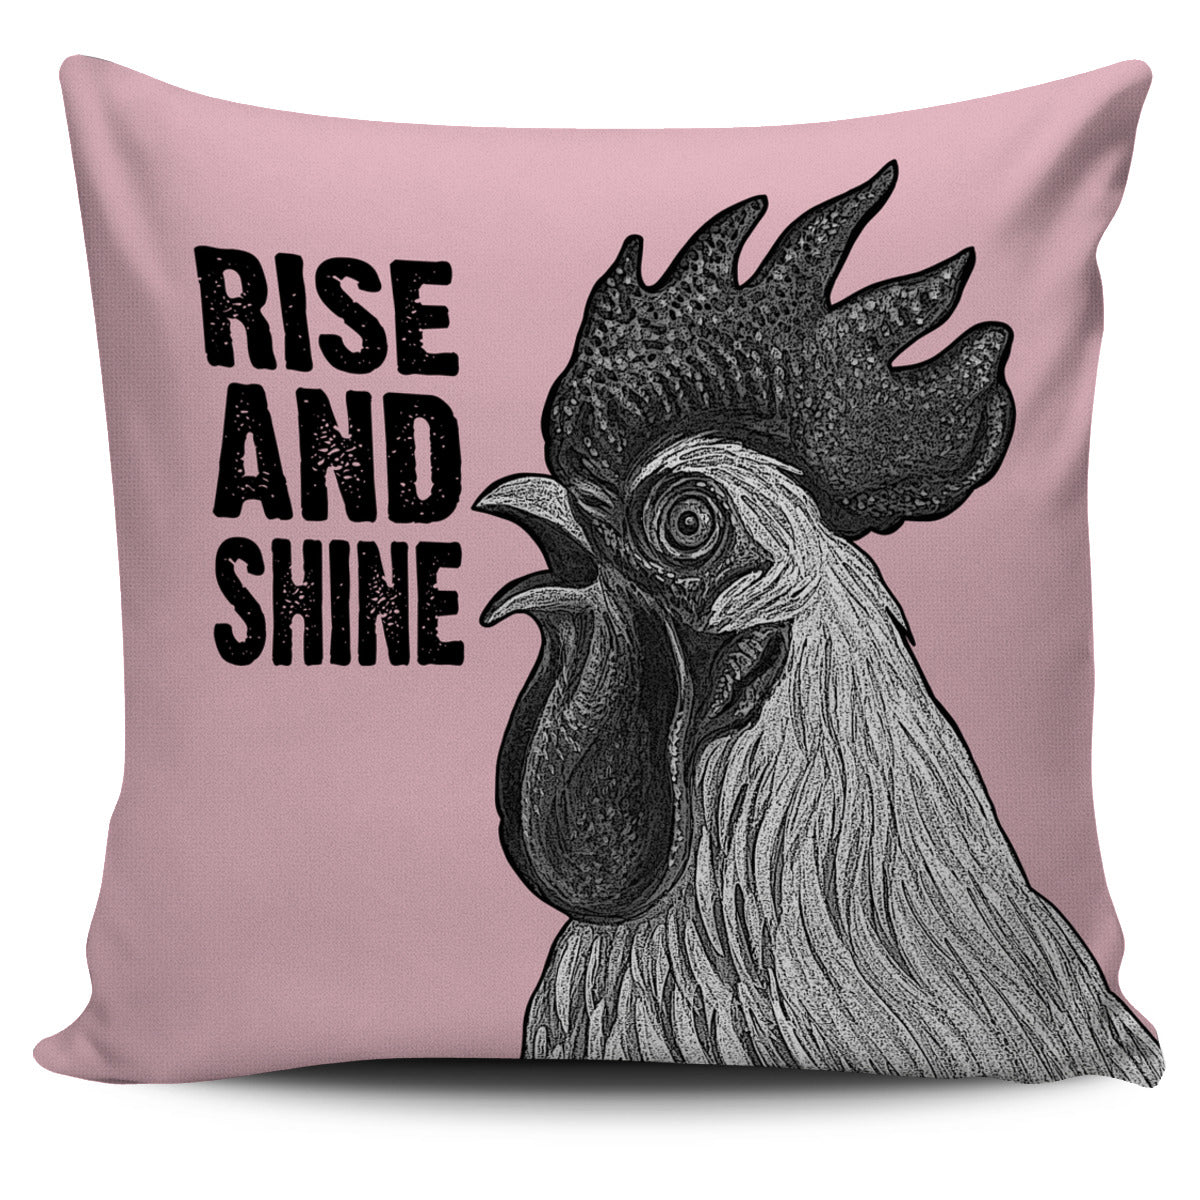 Rise And Shine Pillow Cover